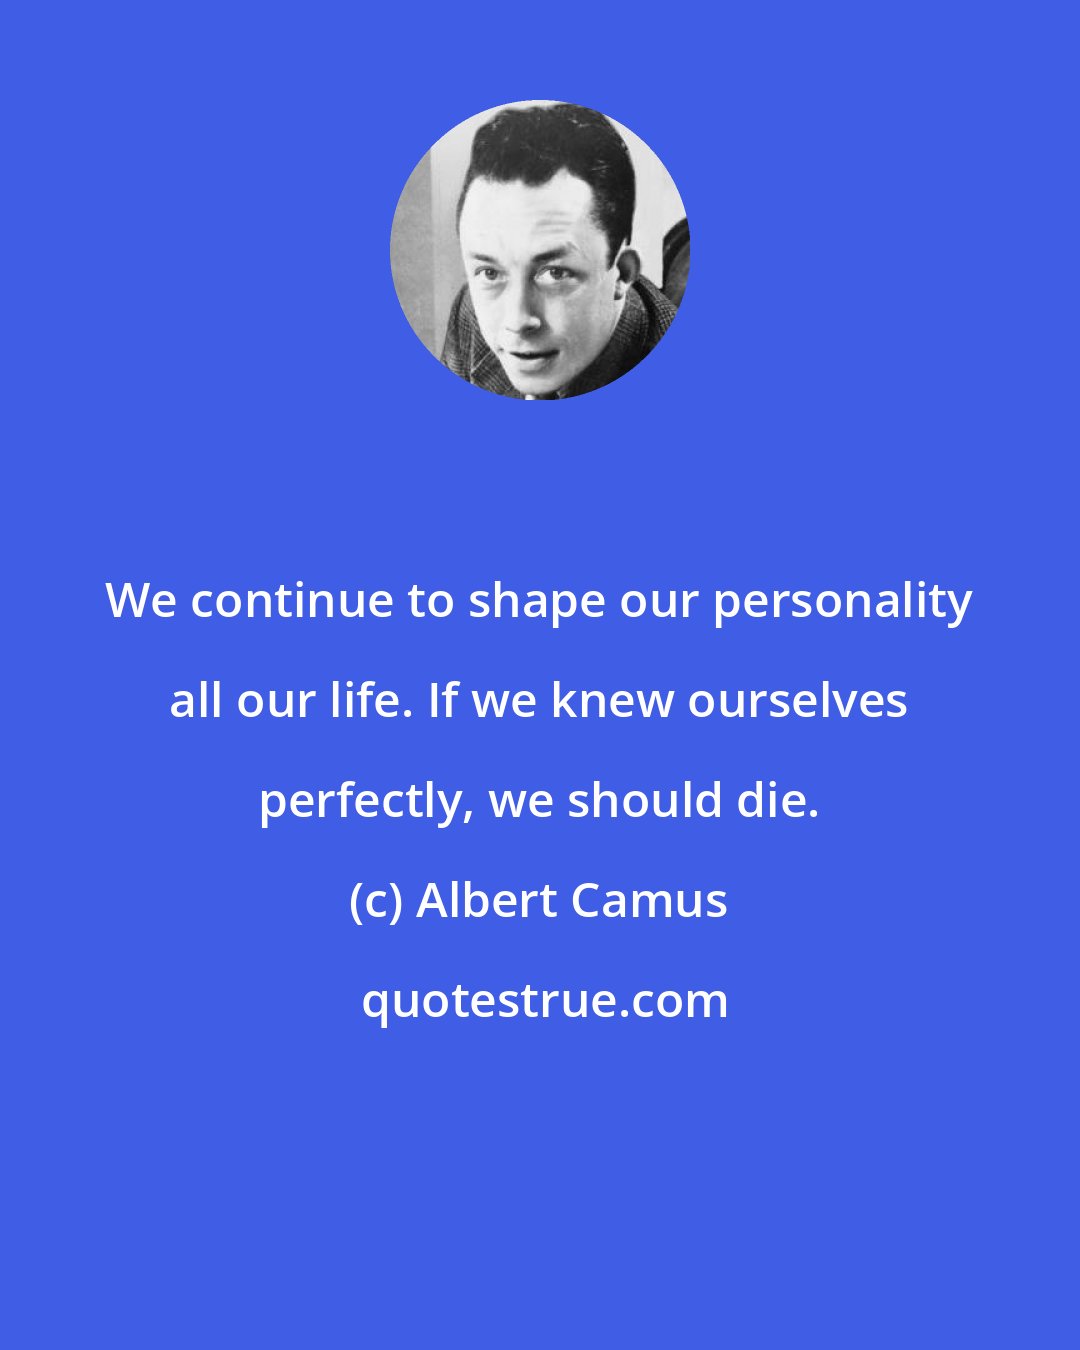 Albert Camus: We continue to shape our personality all our life. If we knew ourselves perfectly, we should die.